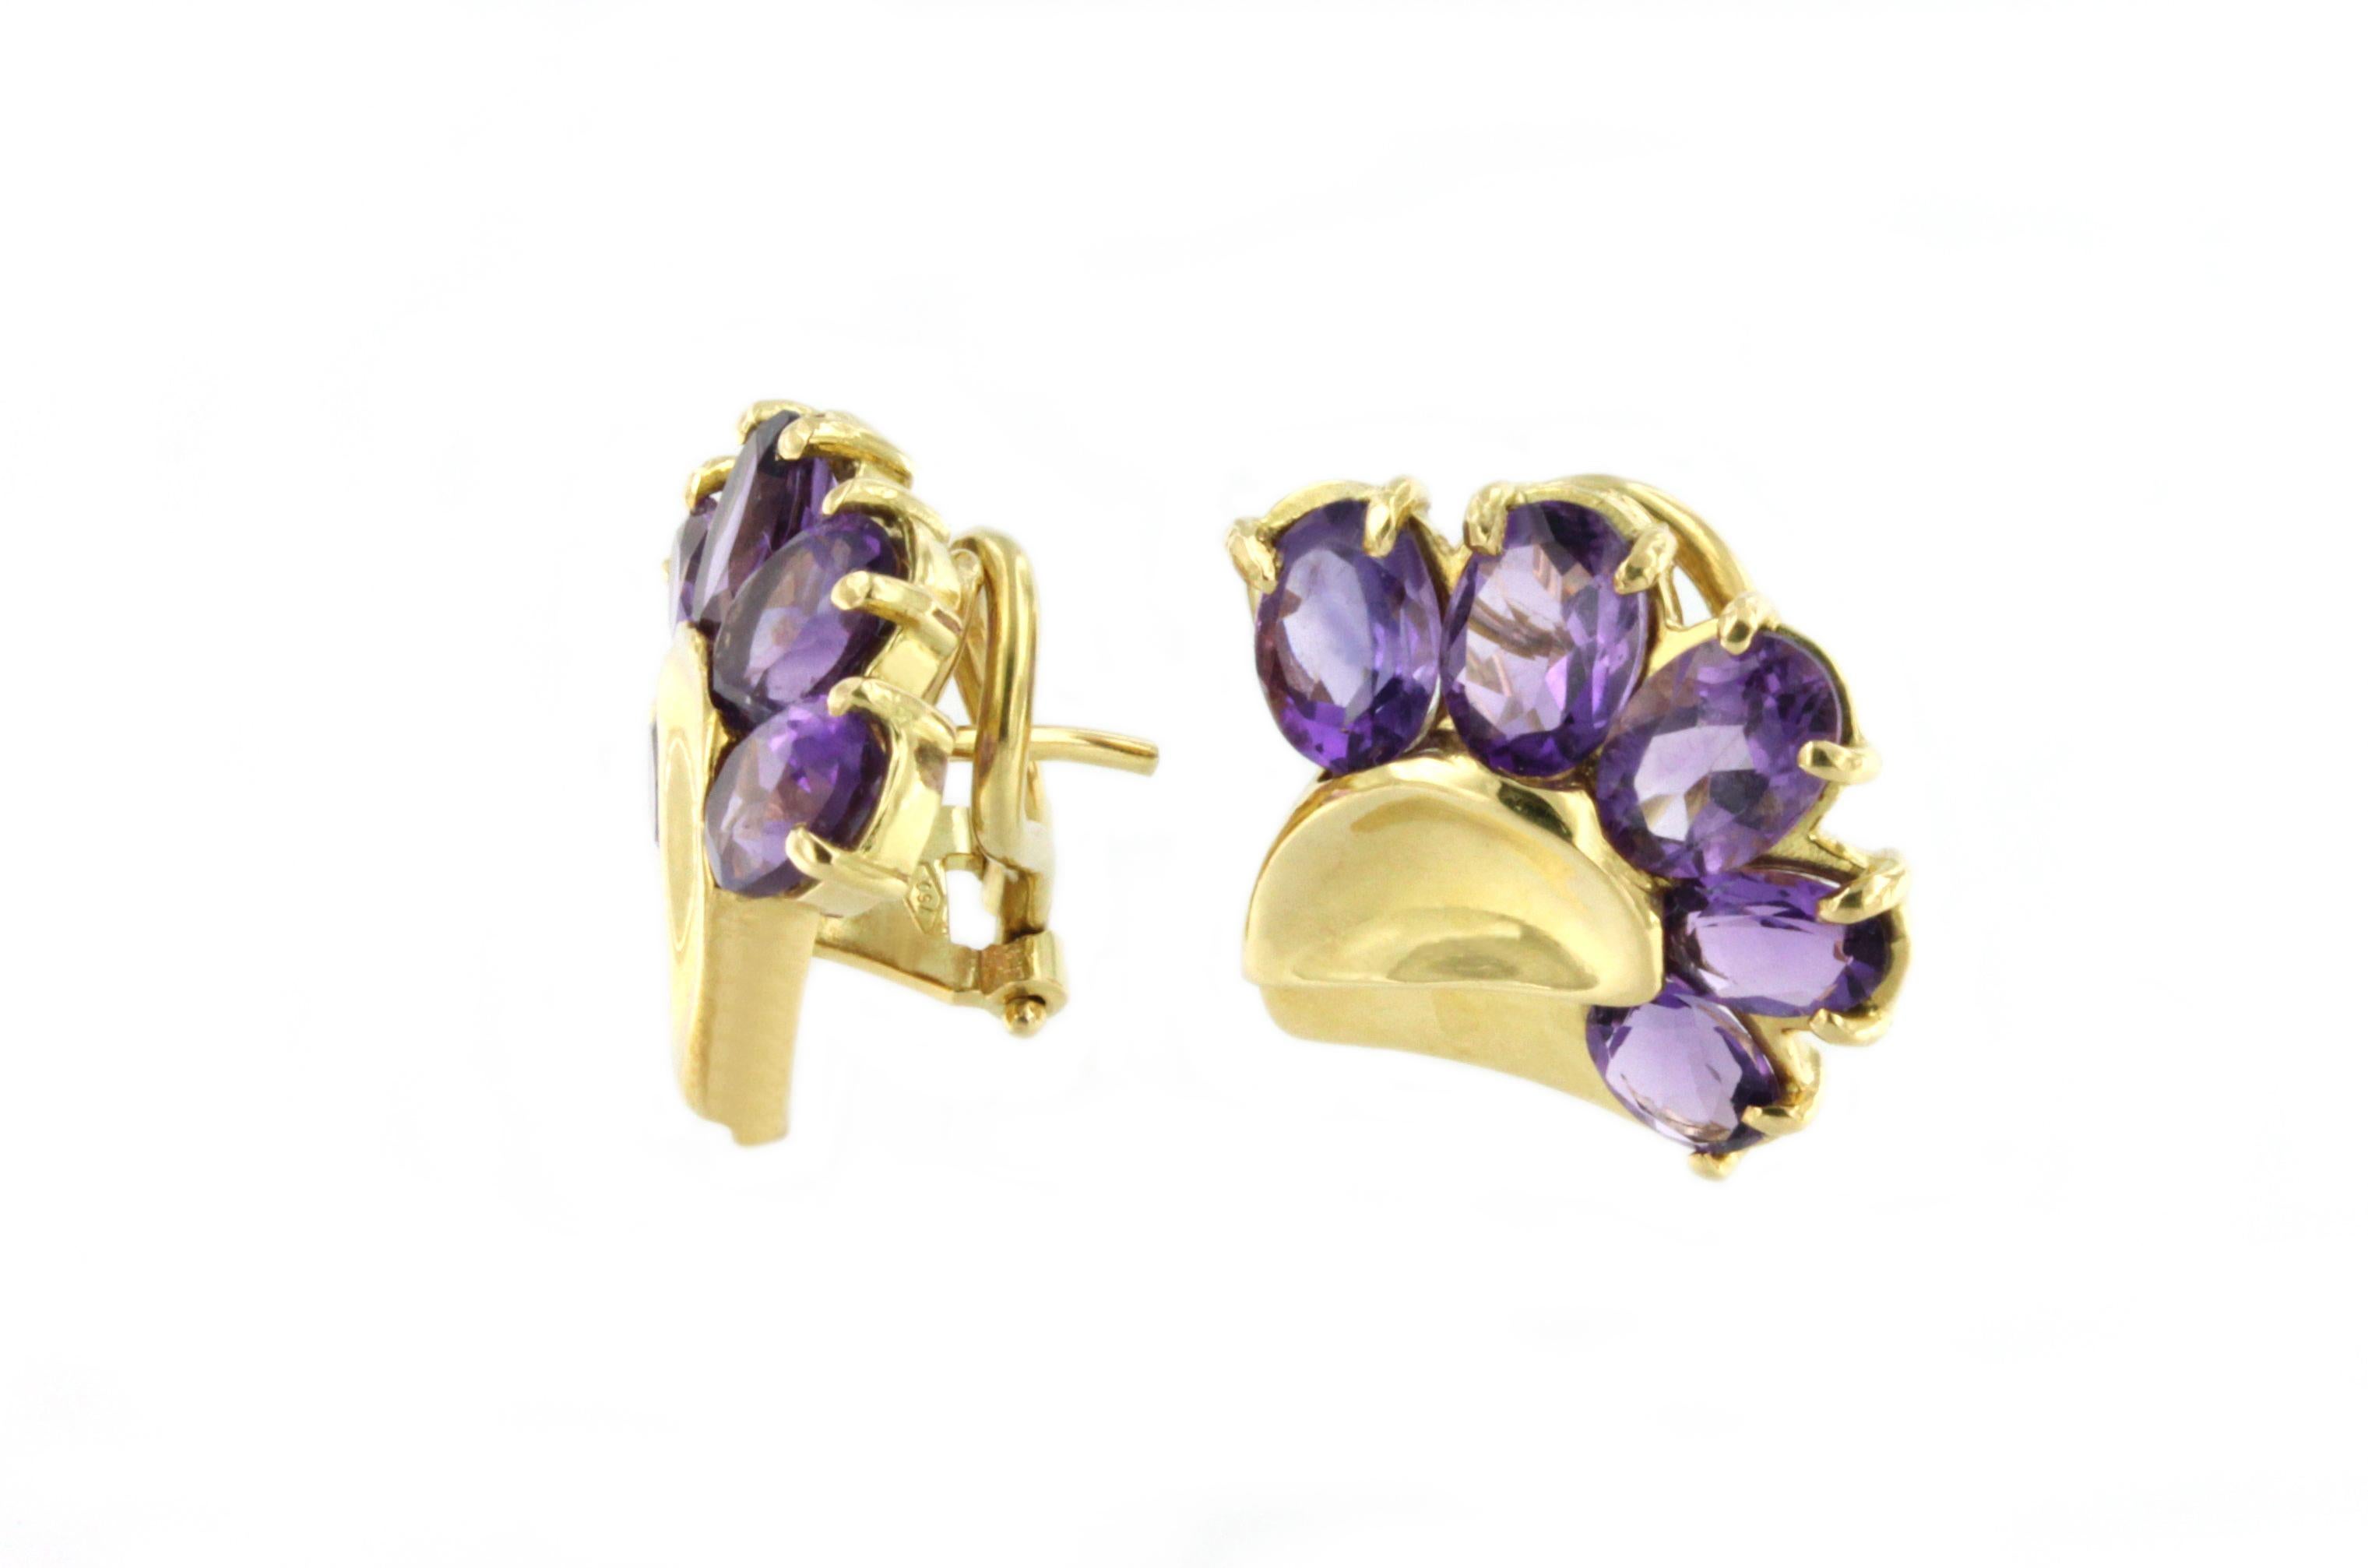 Fashion earrings for any occasion.
The design is very accurate and unique. Our mission is to combine colorful stones and unique shape and design.
Earrings in yellow gold 18 Karat with Purple Amethyst oval cut cut (size stone: mm 6x9 )

All Stanoppi